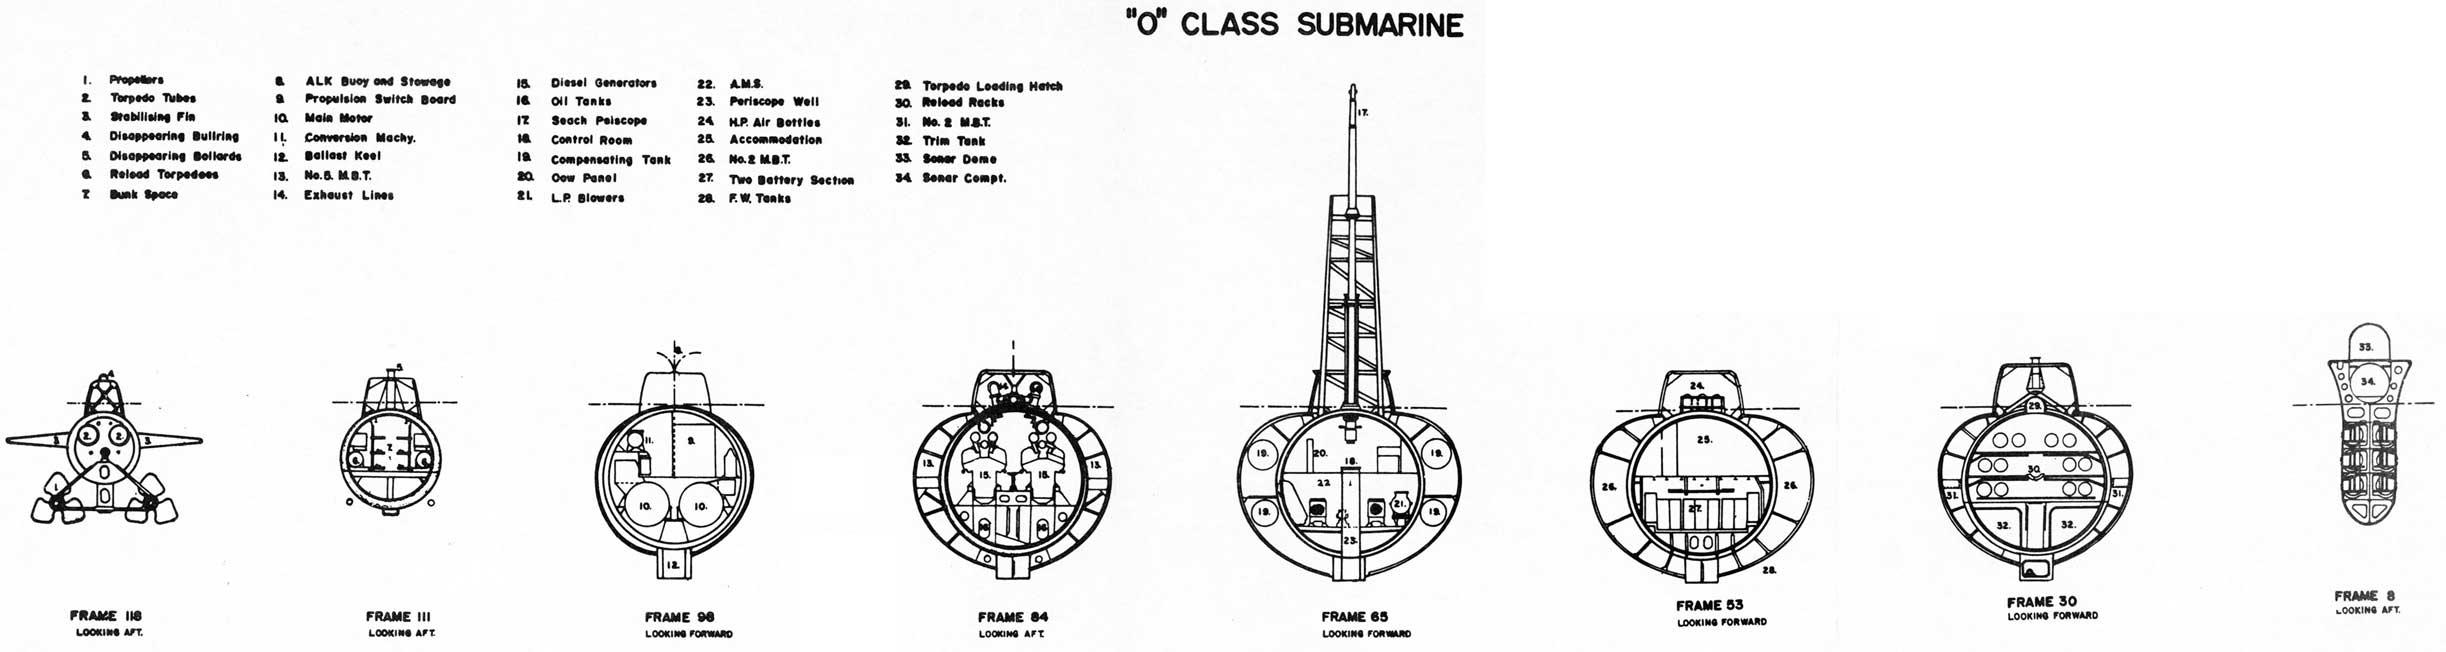 O CLASS SUBMARINE
1. Propellers
2. Torpedo Tubes
3. Stabilizing Fin
4. Disappearing Bollards
5. Disappearing Bollards
6. Reload Torpedoes
7. Bunk Space

8. ALK Buoy and Stowage
9. Propulsion Switch Board
10. Main Motor
11. Conversion Machy.
12. Ballast Keel
13. No. 5 M.B.T.
14. Exhaust Lines

15. Diesel Generators
16. Oil Tanks
17. Search Periscope
18. Control Room
19. Compensating Tank
20. Oow Panel
21. L.P. Blowers

22. A.M.S. 
23. Periscope Well
24. H.P. Air Bottles
25. Accommodation
26. No. 2 M.B.T.
27. Two Battery Section
28. F. W. Tanks

29. Torpedo Loading Hatch
30. Reload Racks
31. No. 2 M.B.T.
32. Trim Tank
33. Sonar Dome
34 Sonar Compt.

SECTIONAL VIEWS